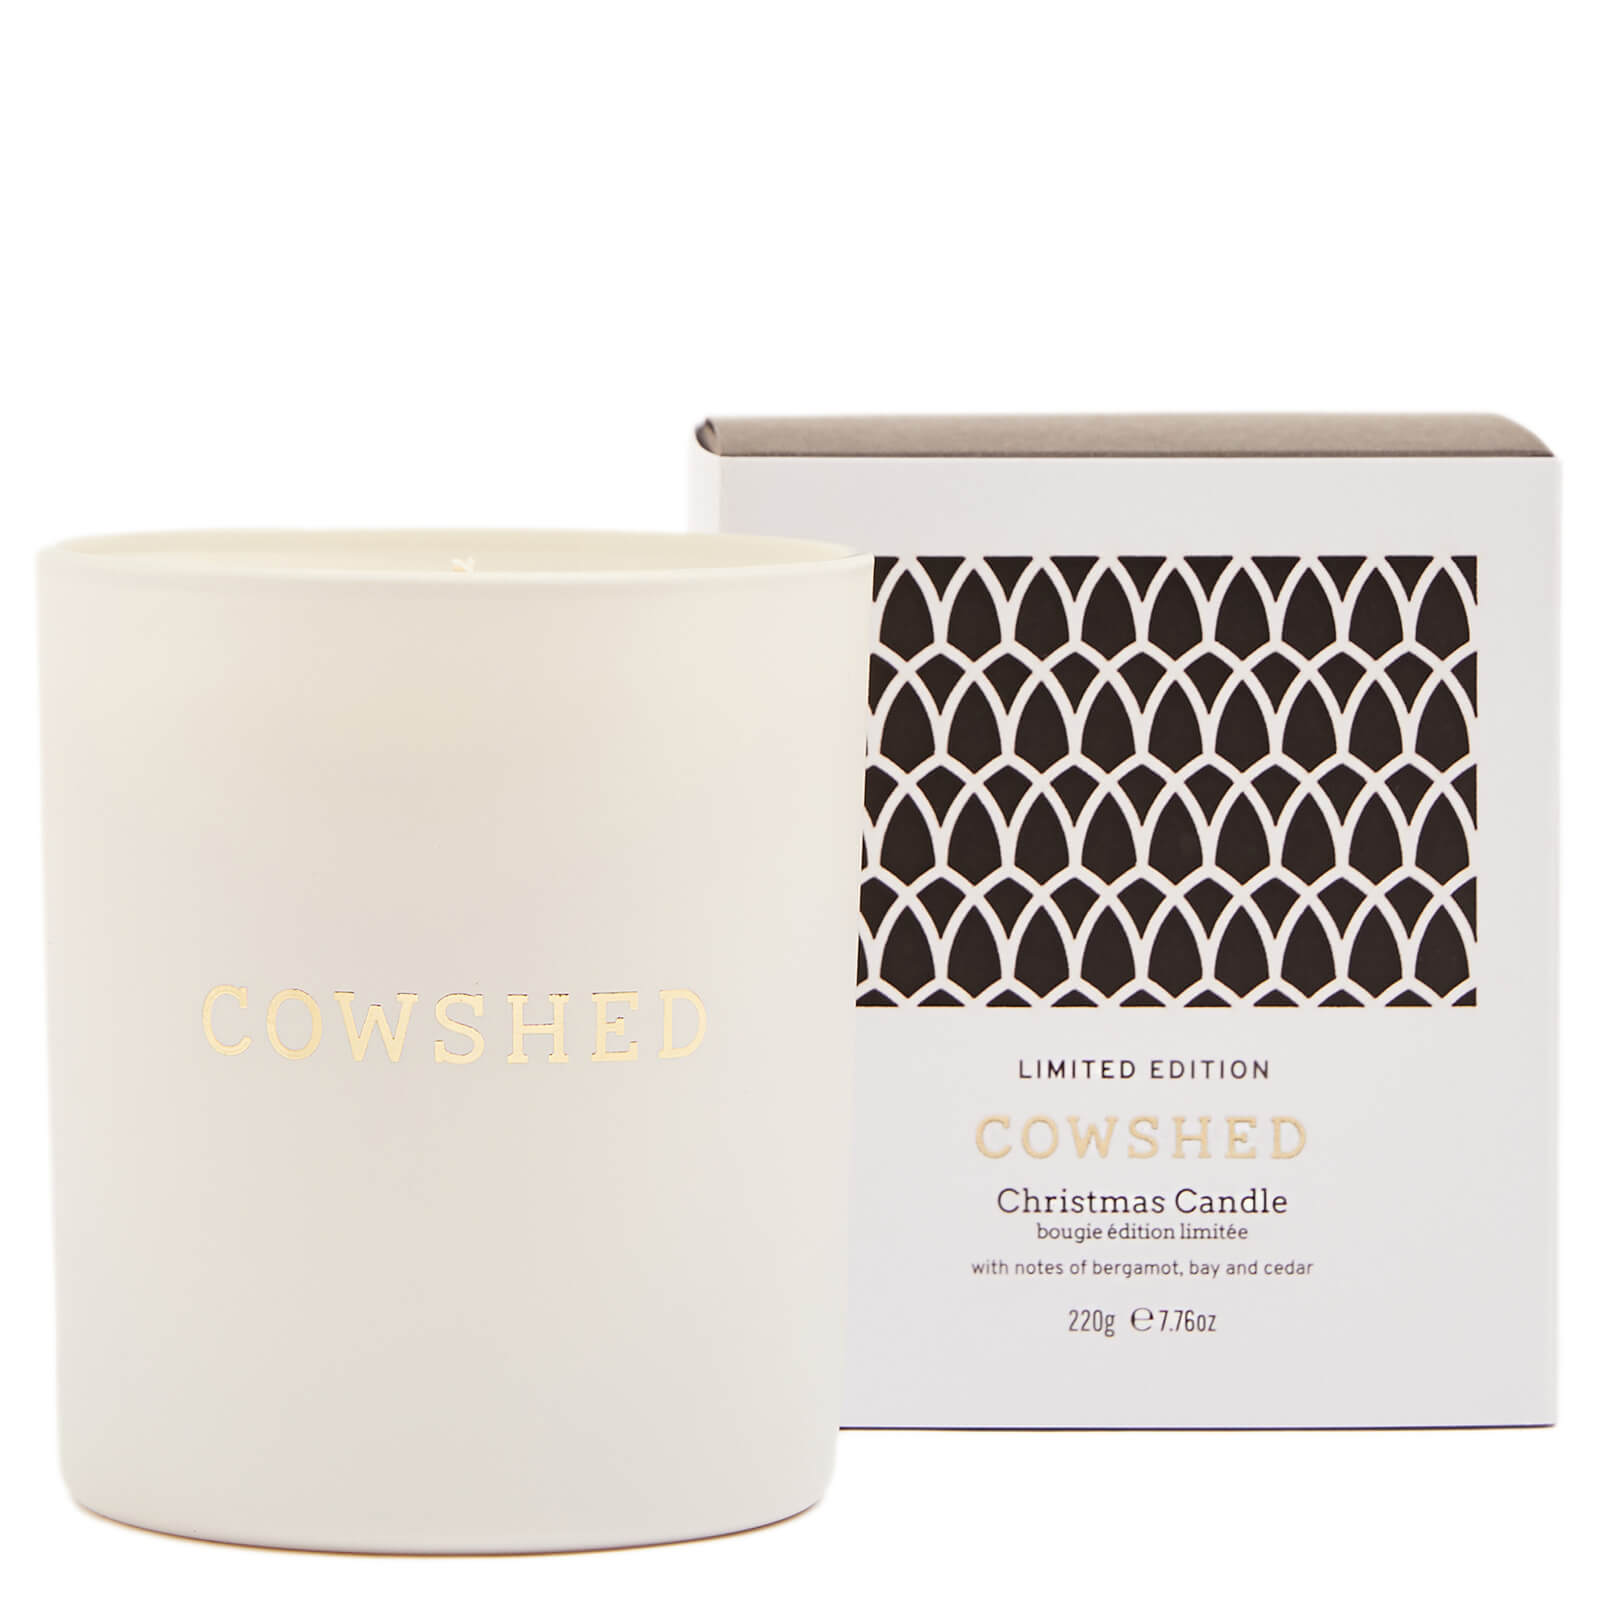 Cowshed Limited Edition Christmas Candle 220g